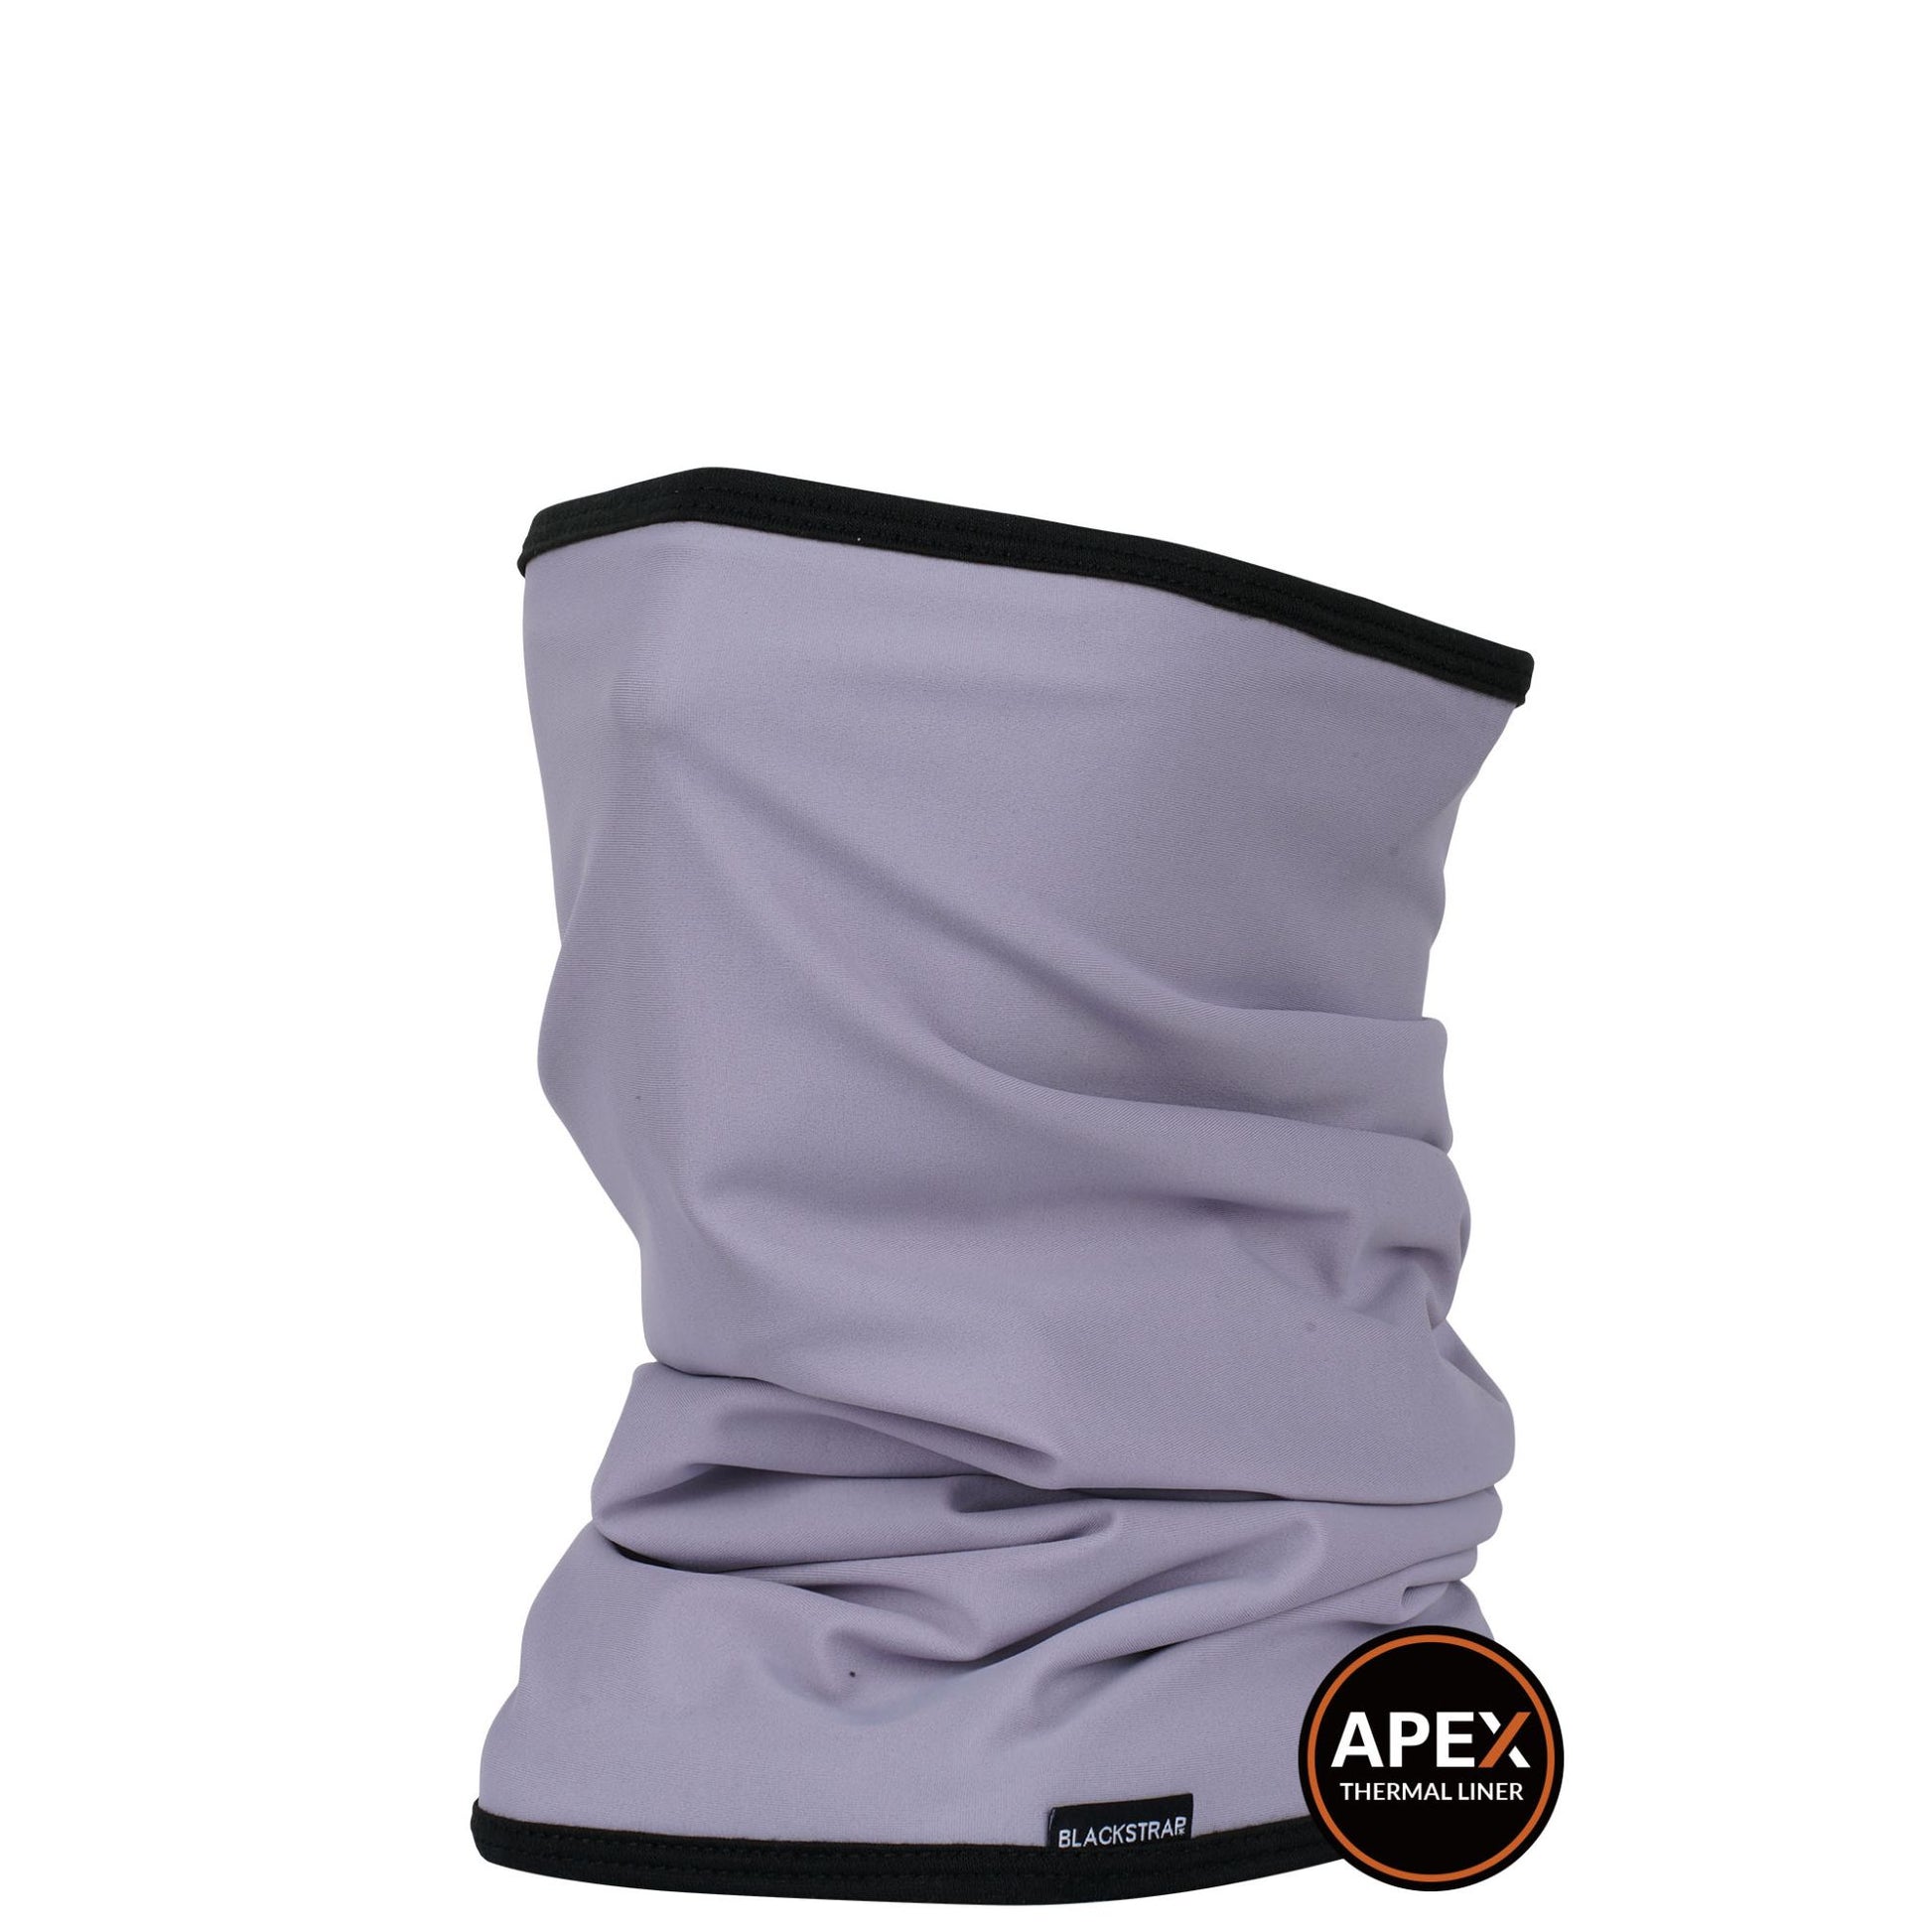 Blackstrap Apex Tube Periwinkle OS Neck Warmers & Face Masks